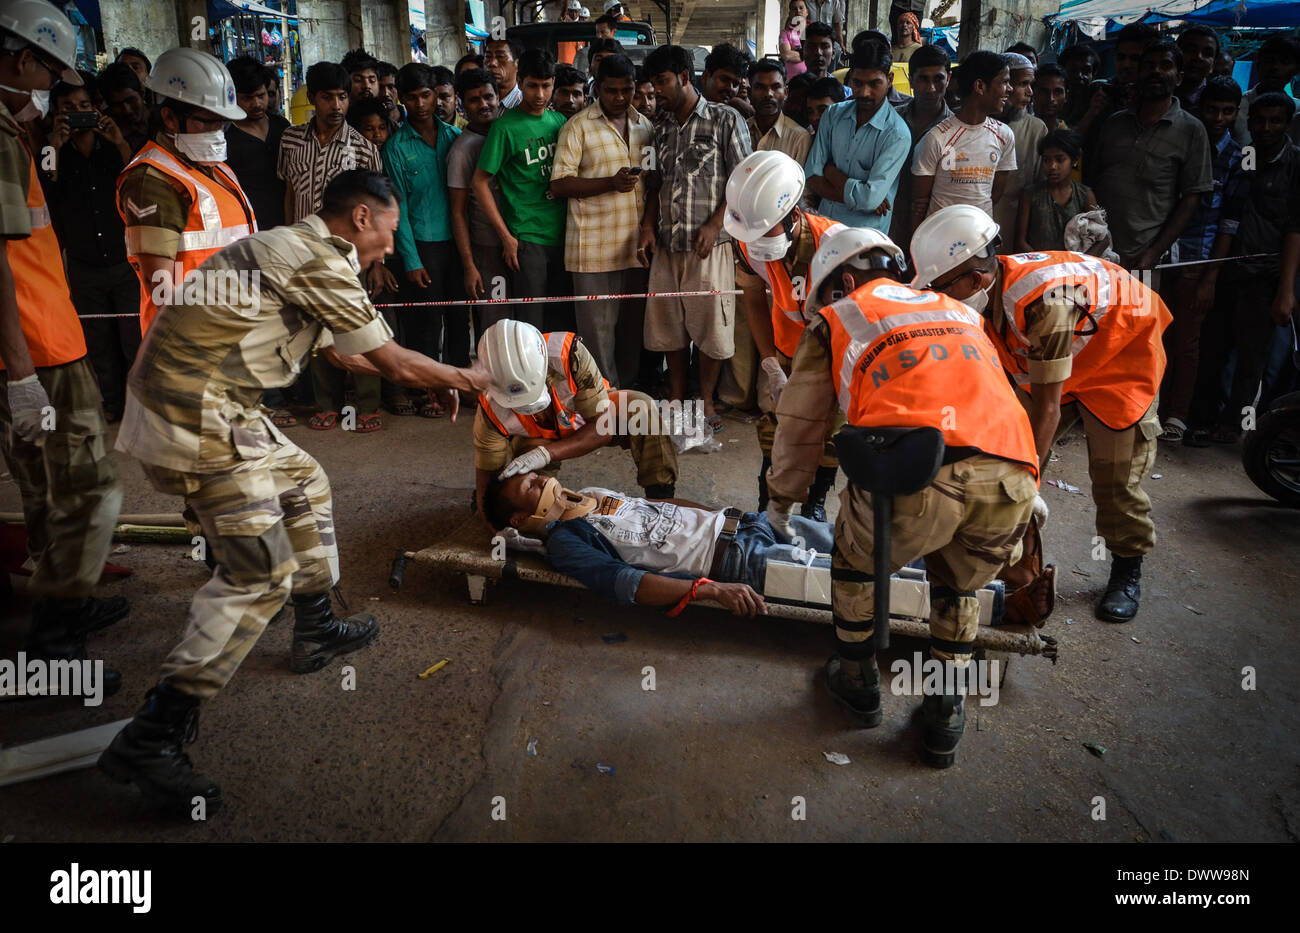 Dimapur, India. 13th Mar, 2014. Nagaland State Disaster Response Force (NSDRF) put a man in a stretcher pretending to be injured as onlookers watch during an earthquake mock drill in Dimapur, India north eastern state of Nagaland on Thursday, March 13, 2014. The entire north east India are exercising earthquake mock drill, also one of the biggest mock drill in South East Asia aiming to assess multi-state disaster preparedness, for the fear of 1897's 8.7 magnitude Shillong earthquake replication. Credit:  ZUMA Press, Inc./Alamy Live News Stock Photo